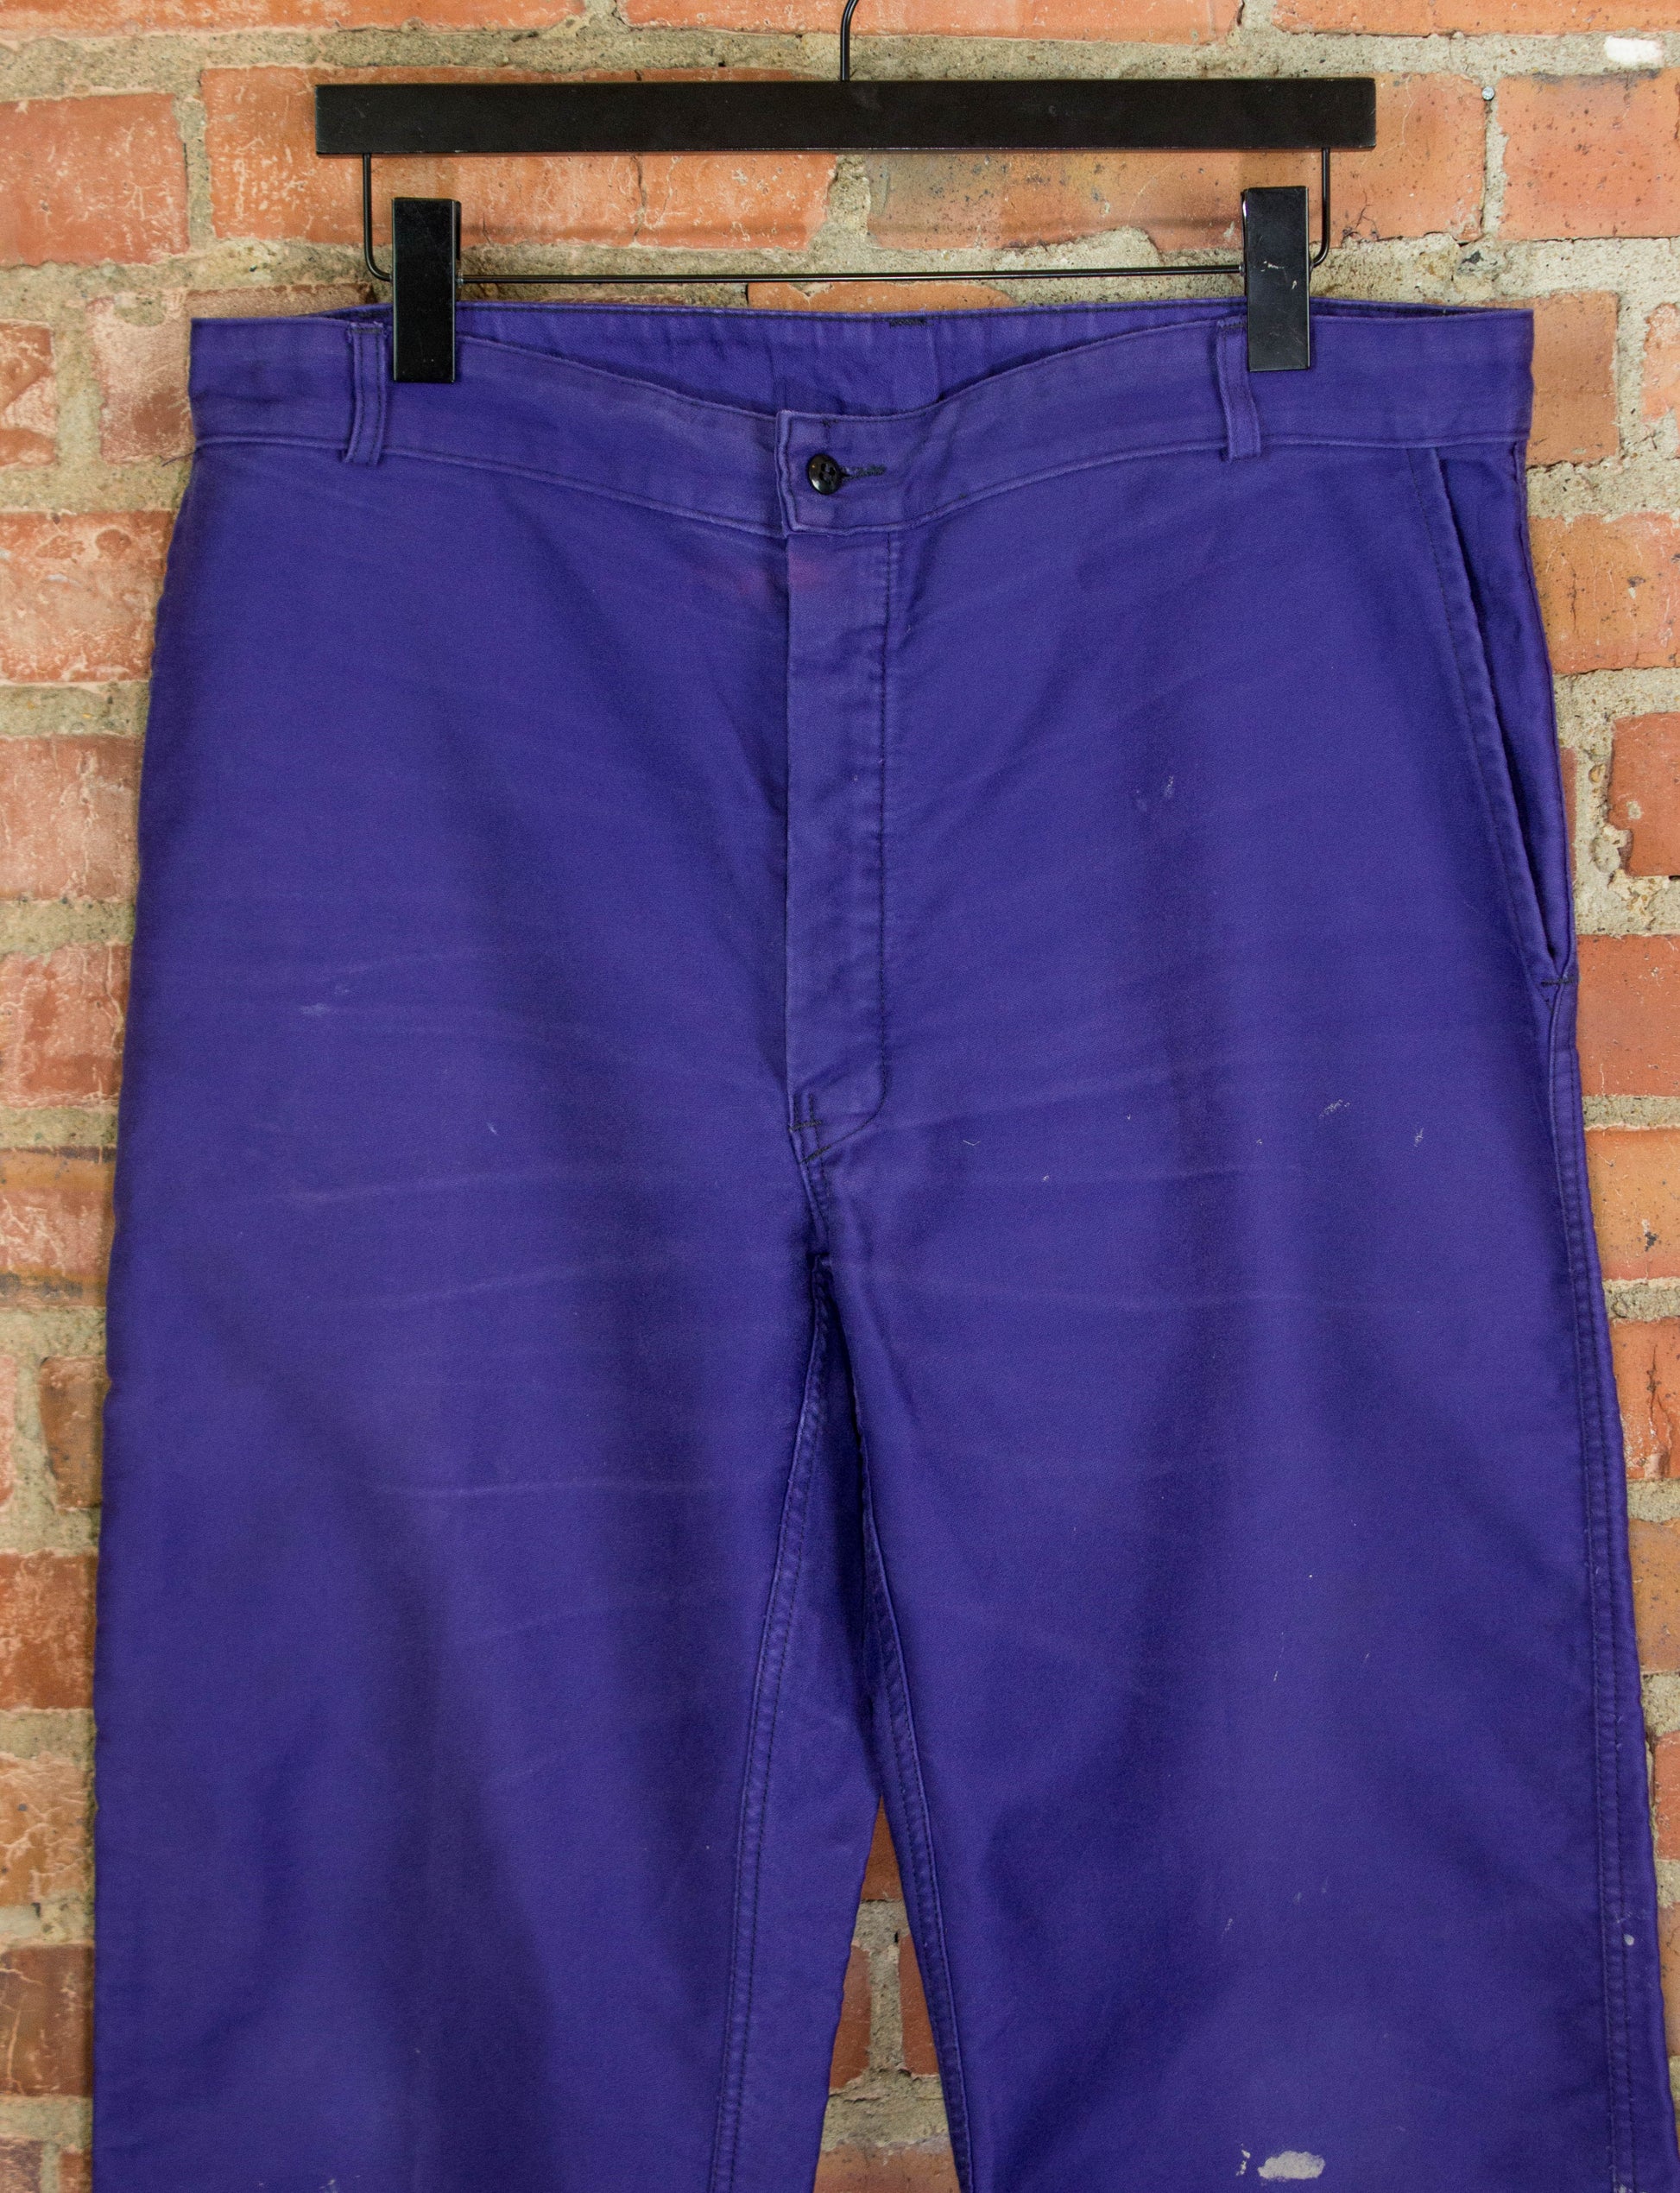 Vintage Adolphe Lafont Faded Purple Moleskin French Work Pants Size 36x32